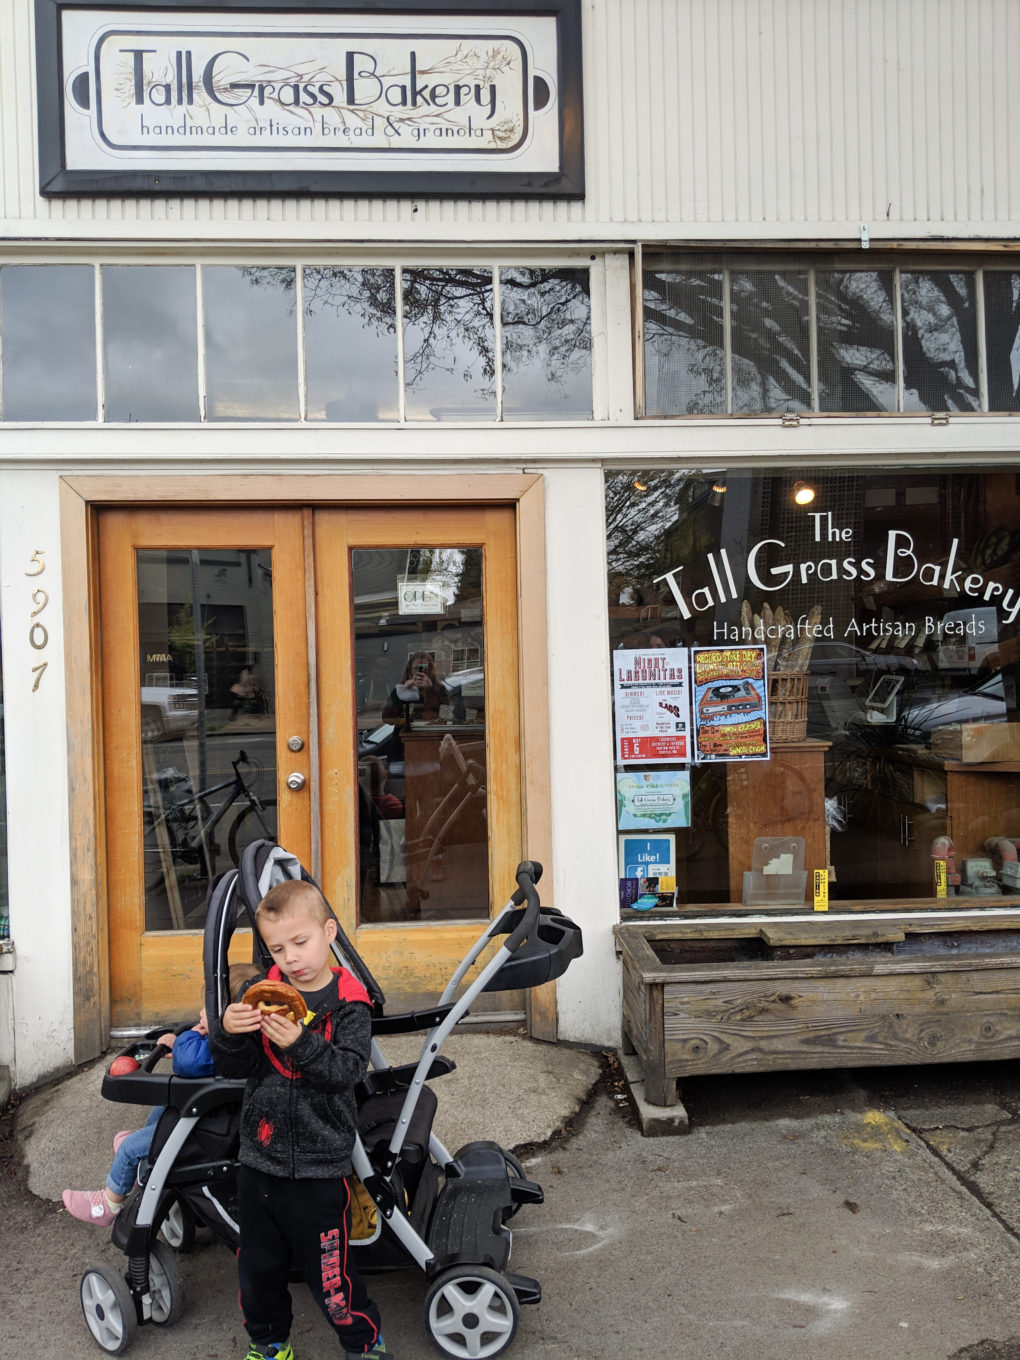 Tall Grass Bakery - How to visit Seattle with kids on a 3 day trip. Fun activities to do and where to eat.